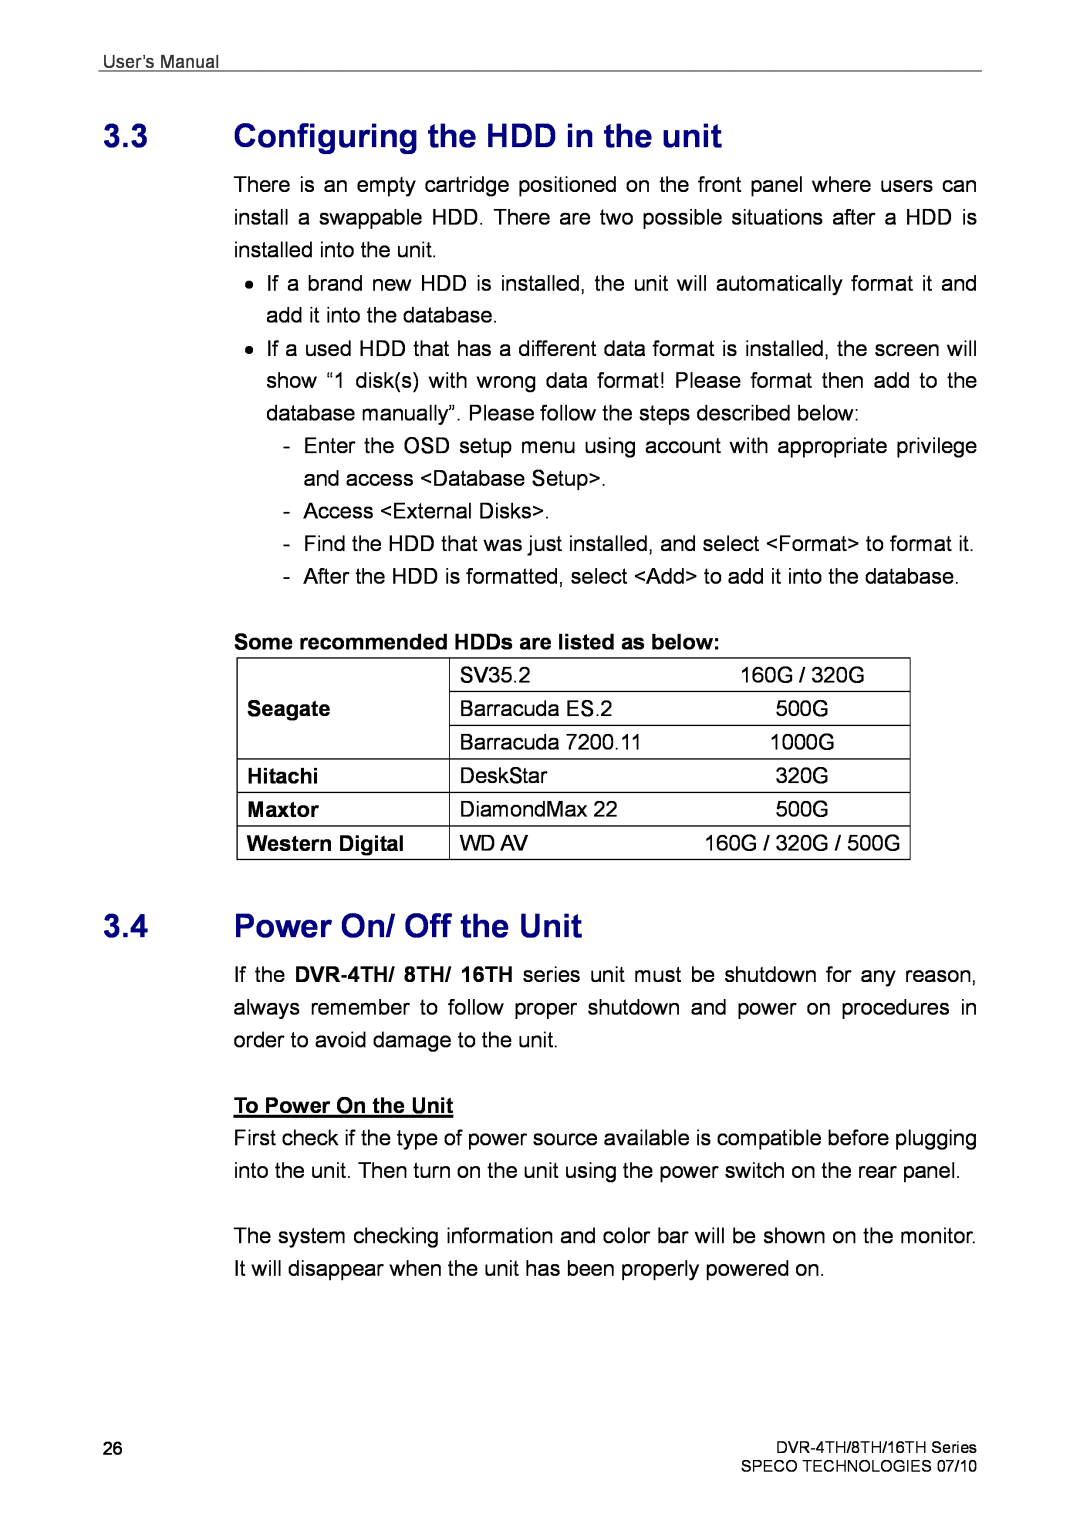 Speco Technologies 8TH Configuring the HDD in the unit, Power On/ Off the Unit, Some recommended HDDs are listed as below 